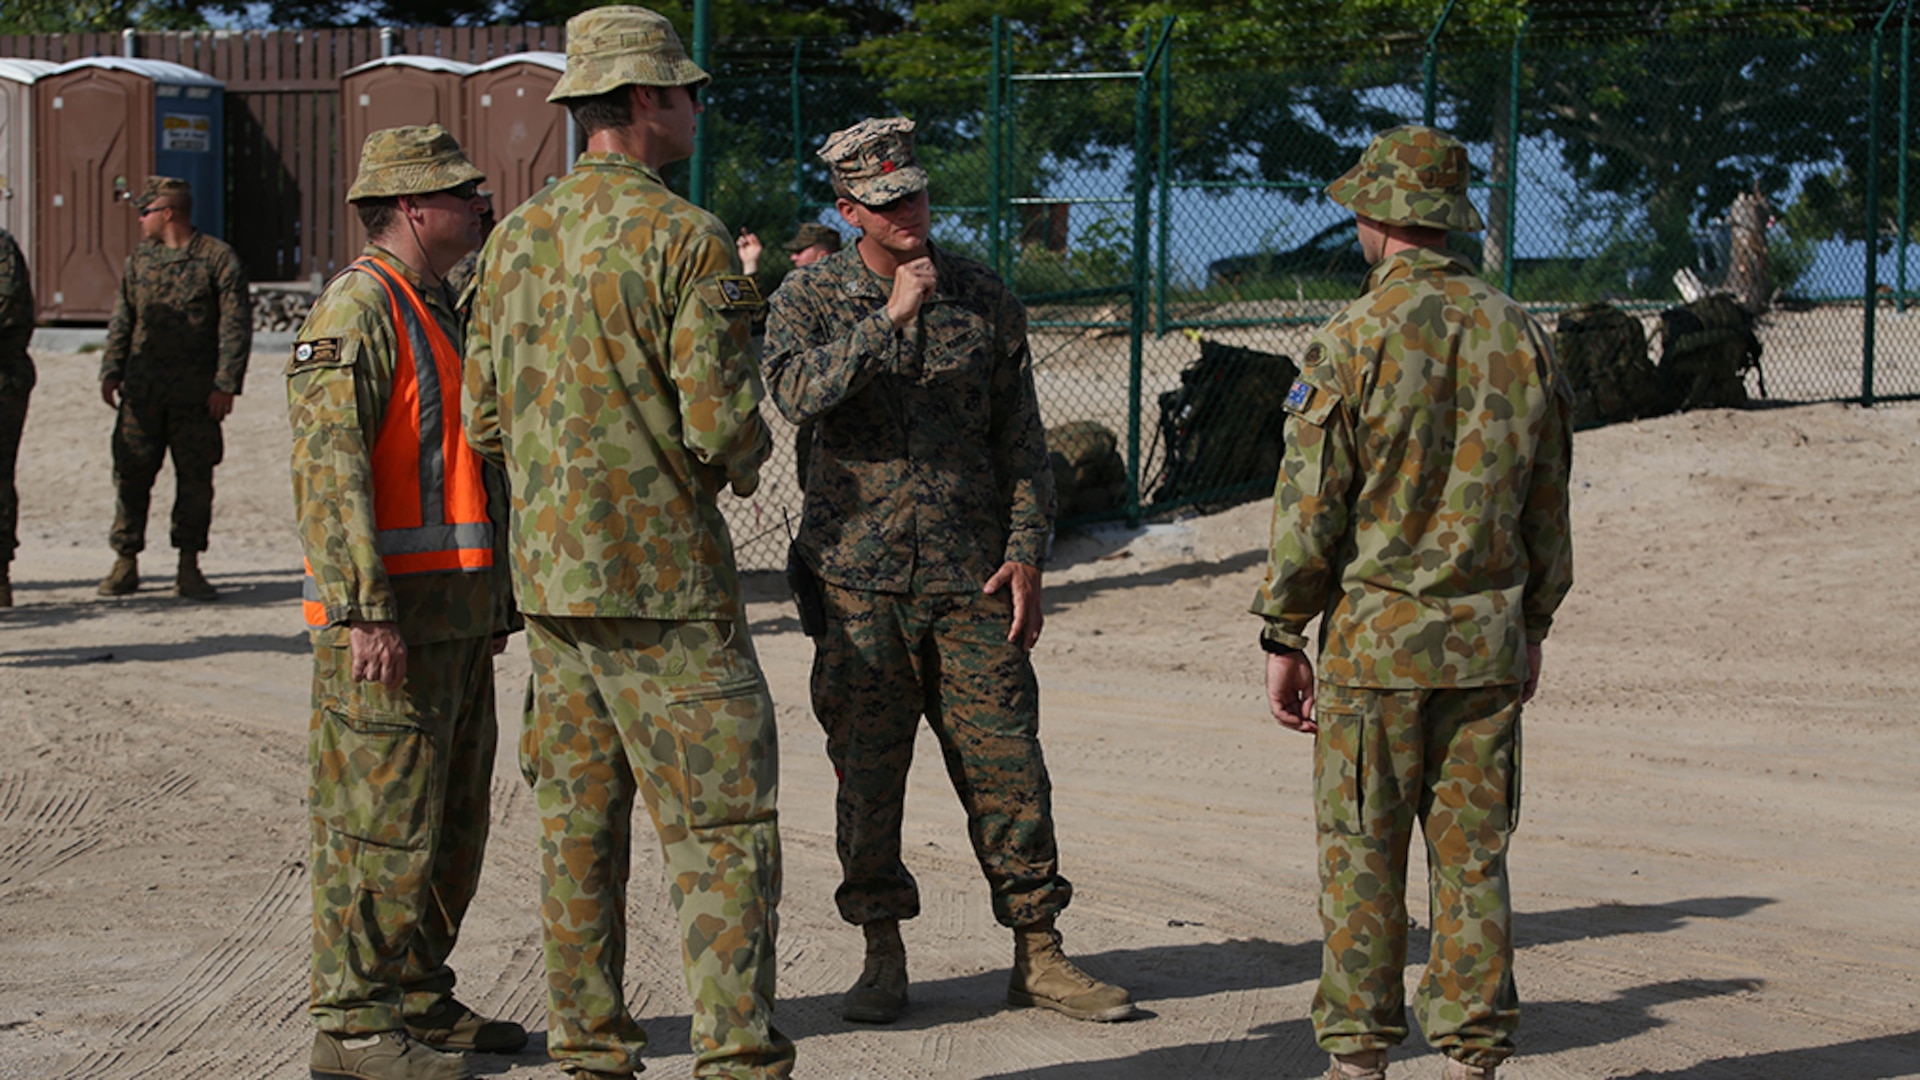 KAWAIHAE PIER, Hawaii (July 12, 2016) – U.S. Marine Sgt. Max T. Humphreys (center) discusses gear and personnel movement during the 2nd Royal Australian Regiment's arrival to port at the Kawaihae Pier, Hawaii, from the HMAS Canberra July 12, 2016. The soldiers and Marines are participating in Rim of the Pacific 2016, a multinational military exercise, from June 29 to Aug. 4 in and around the Hawaiian Islands. RIMPAC helps the United States Marine Corps integrate joint and combined capabilities to conduct amphibious, offensive, defensive, and stability operations. Humphreys, a native of Pueblo, Colorado, is an embarkation specialist with Transportation Support Company, Combat Logistics Battalion 3, which supports III Marine Expeditionary Force. 